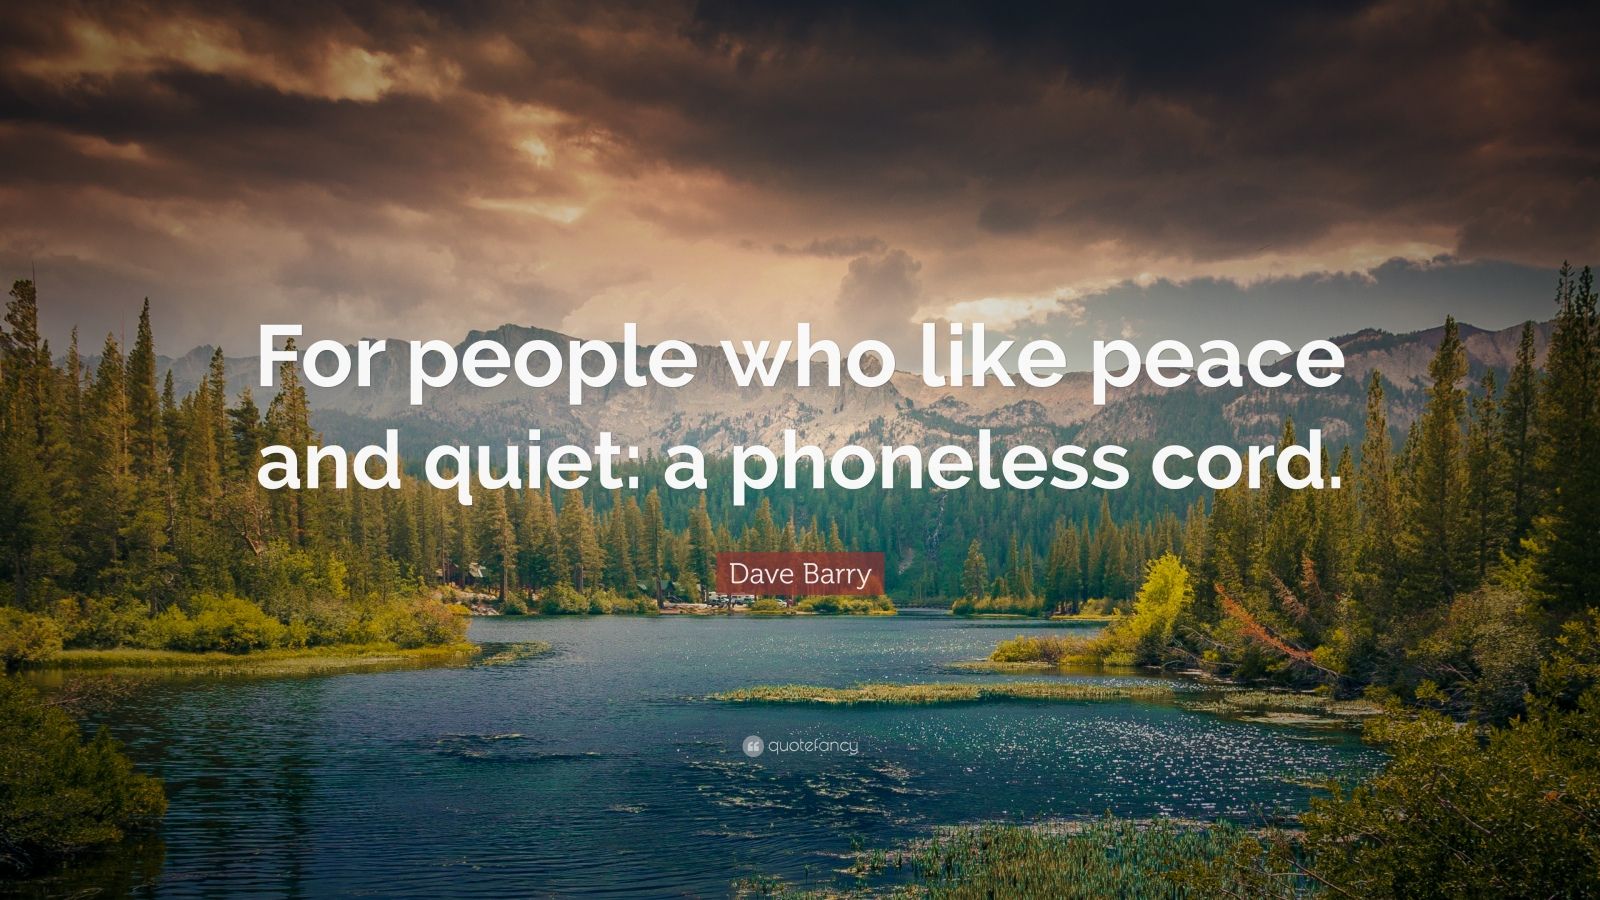 live a quiet and peaceful life